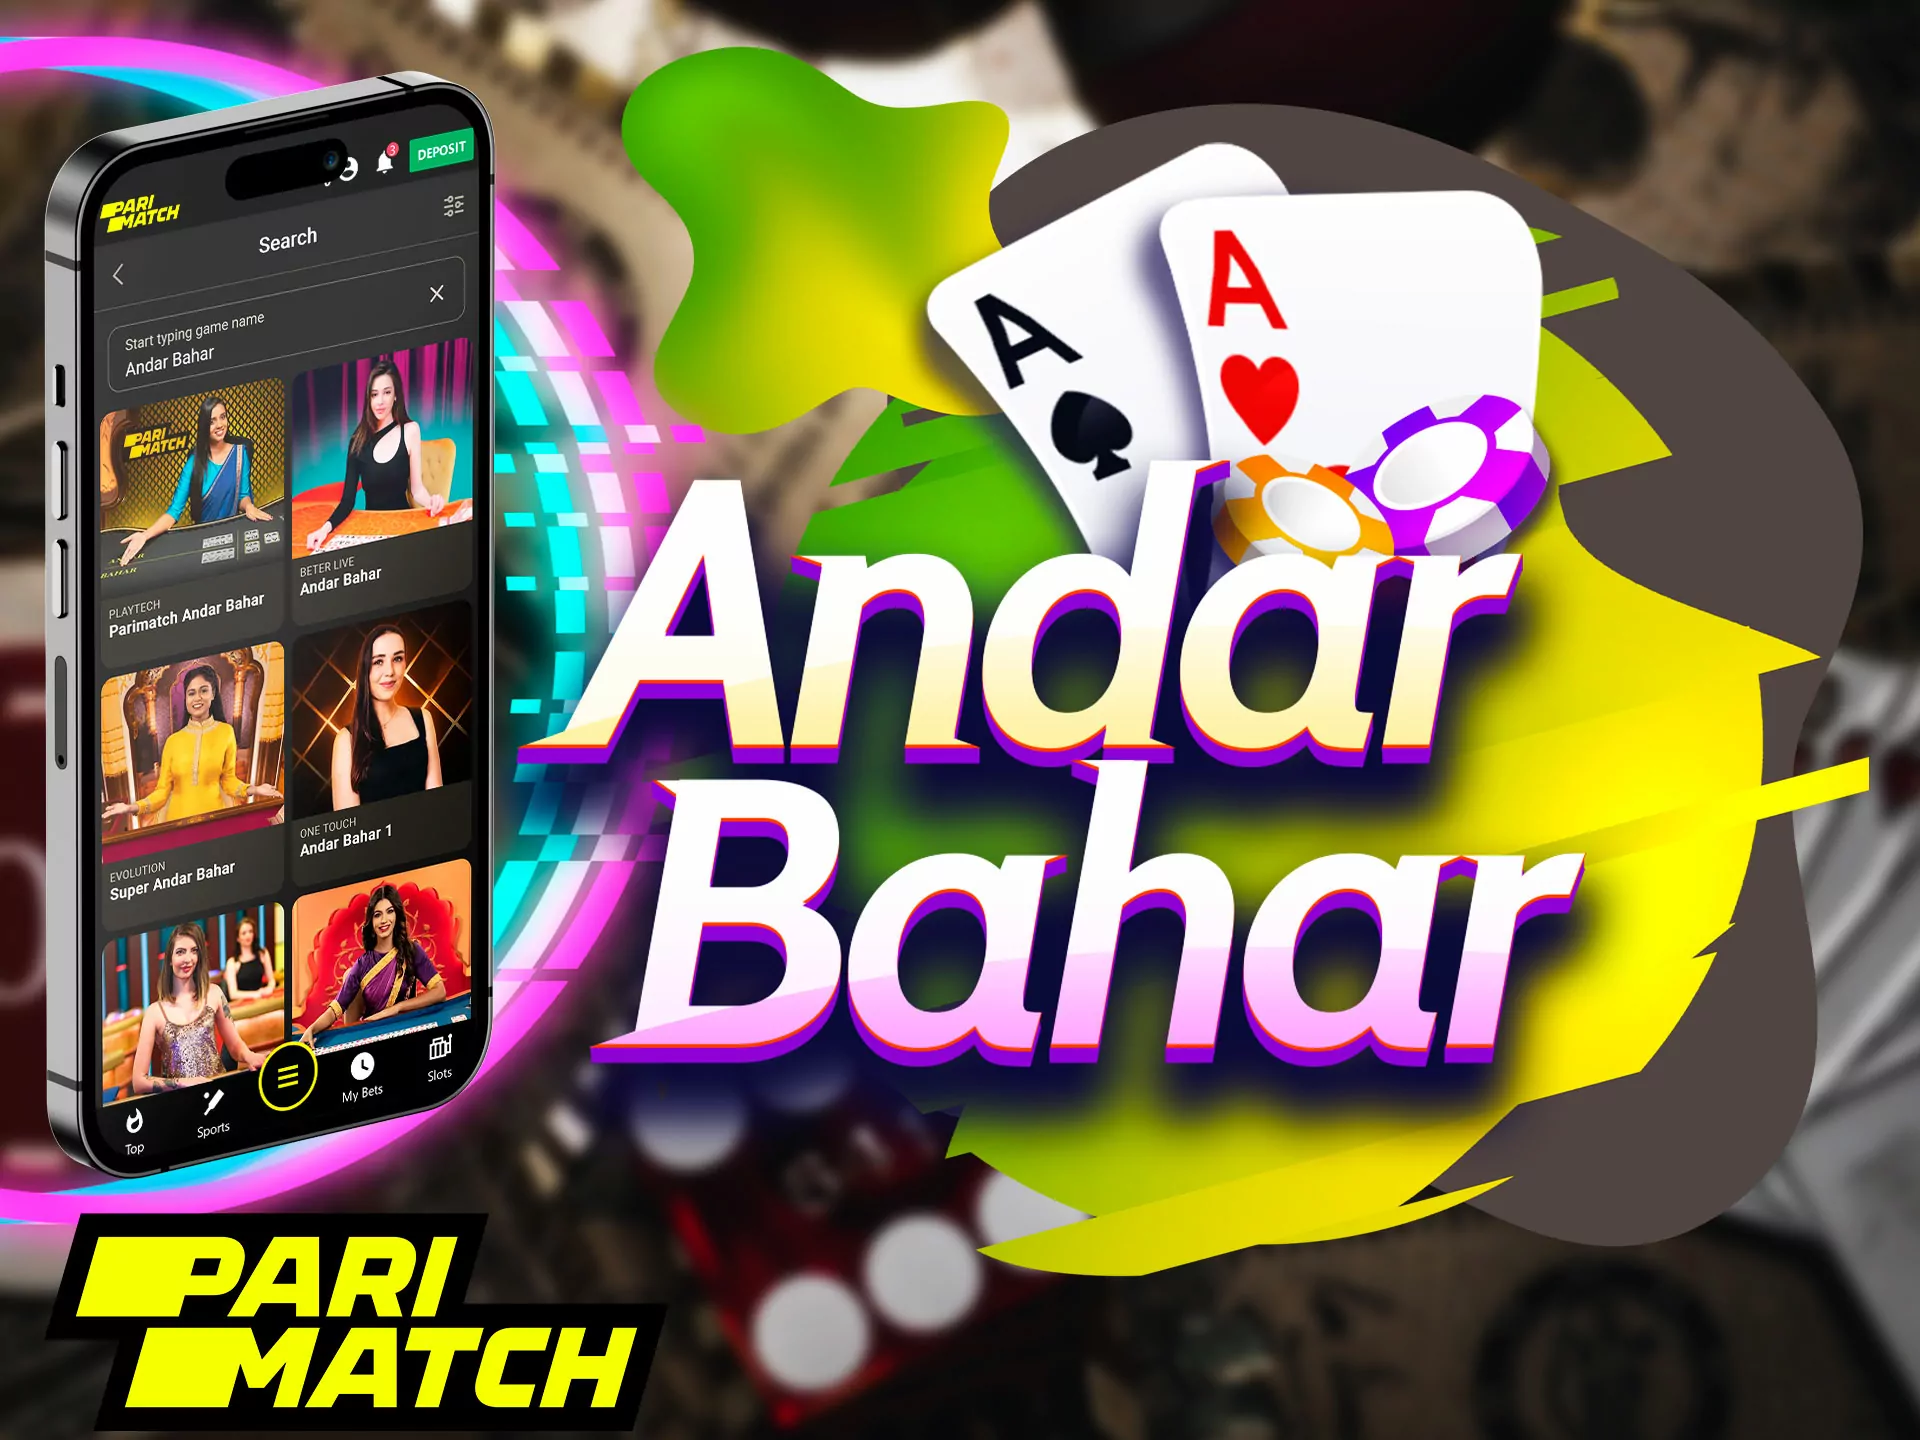 Parimatch online casino presents a game against a live dealer, the client has the opportunity to choose the side of the card.